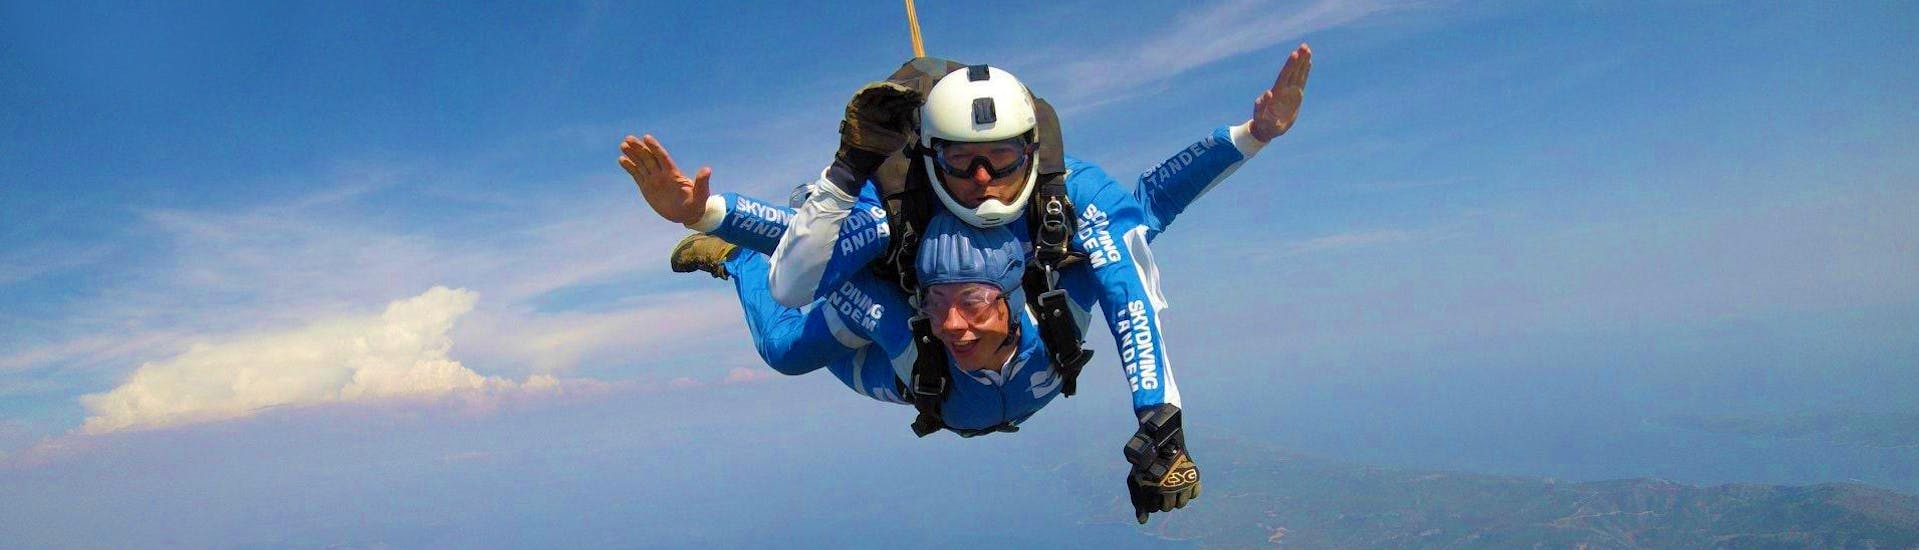 Tandem Skydive in Zagreb from 3000m with Skydiving Tandem Group Croatia - Hero image